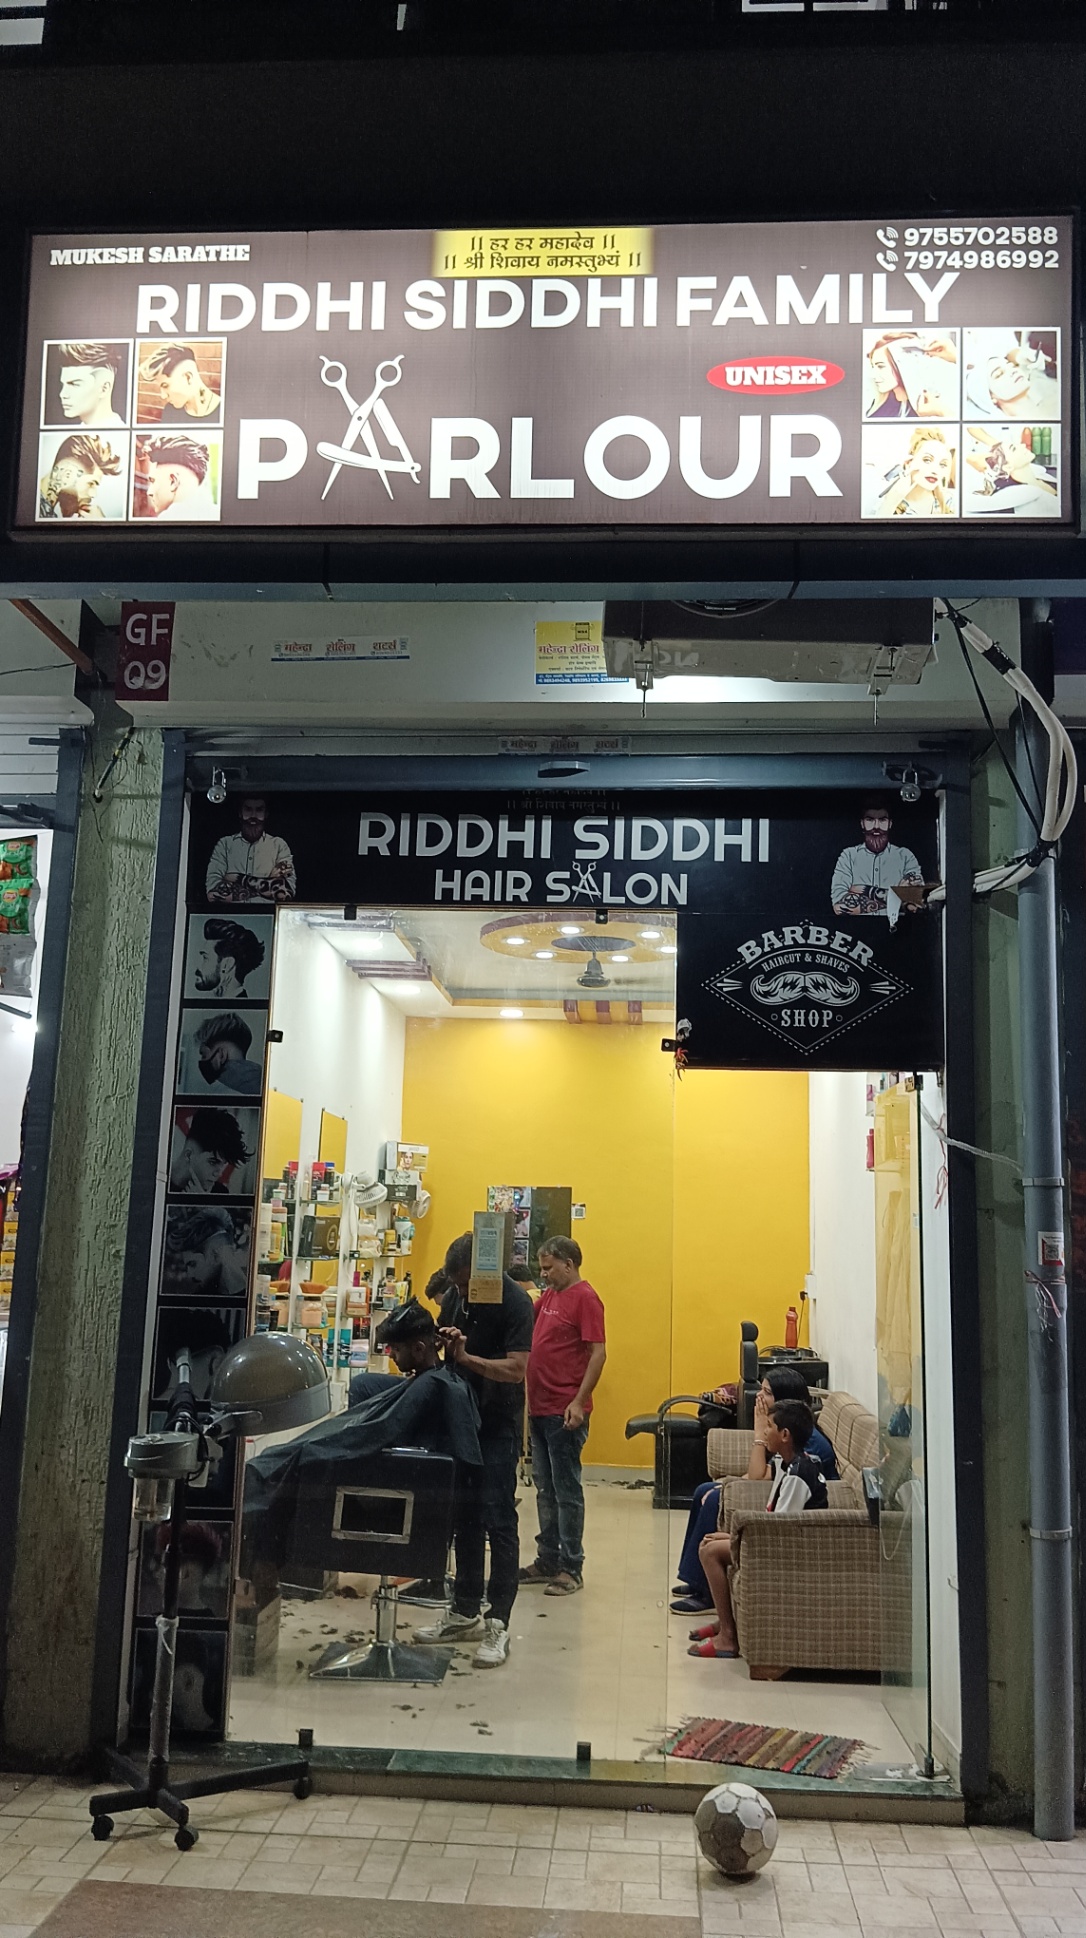 Riddhi Siddhi Family Parlor